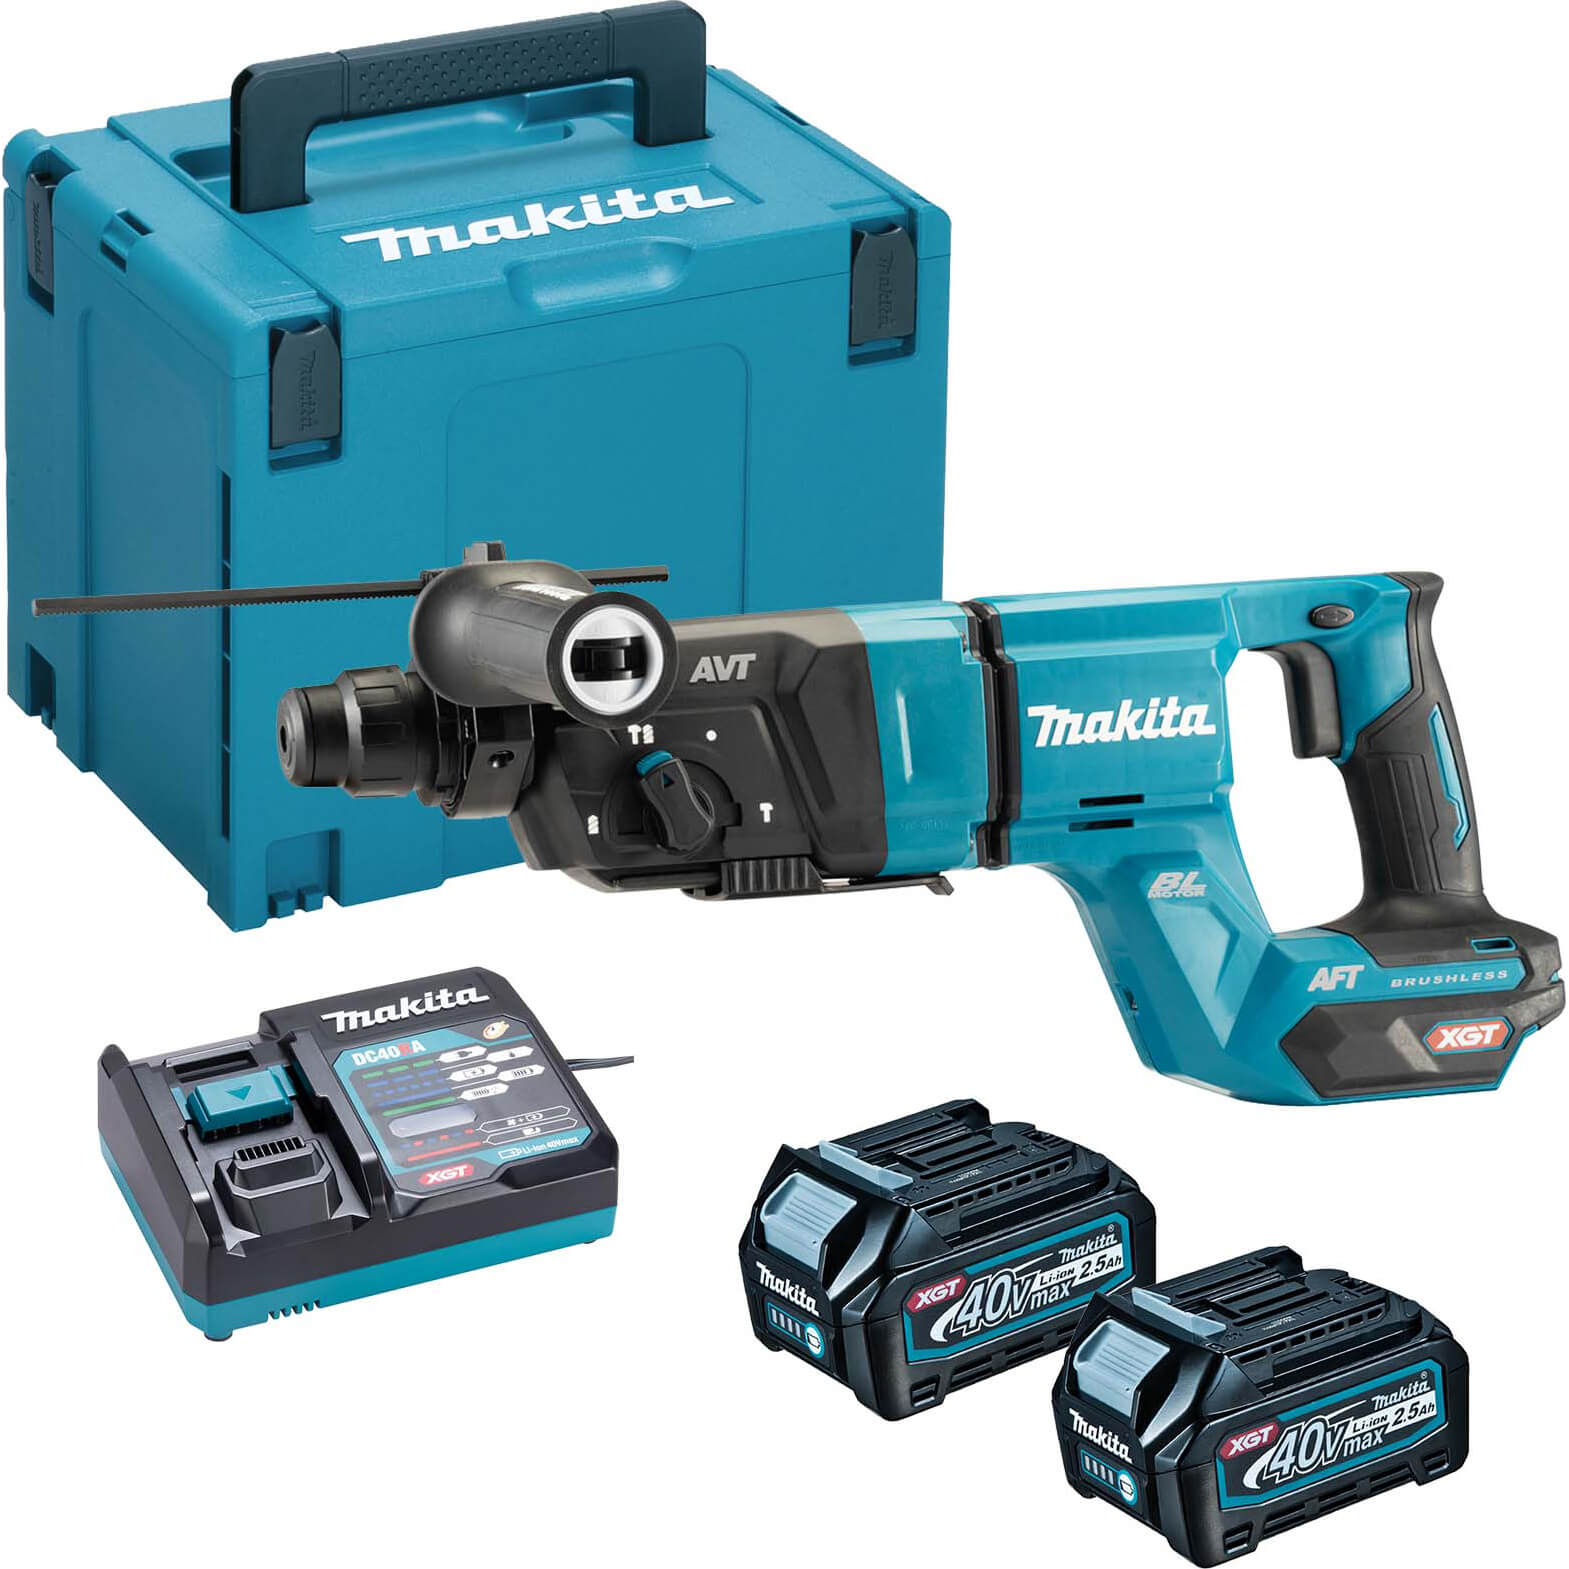 Photo of Makita Hr007g 40v Max Xgt Cordless Brushless Sds Plus Rotary Hammer Drill 2 X 2.5ah Li-ion Charger Case